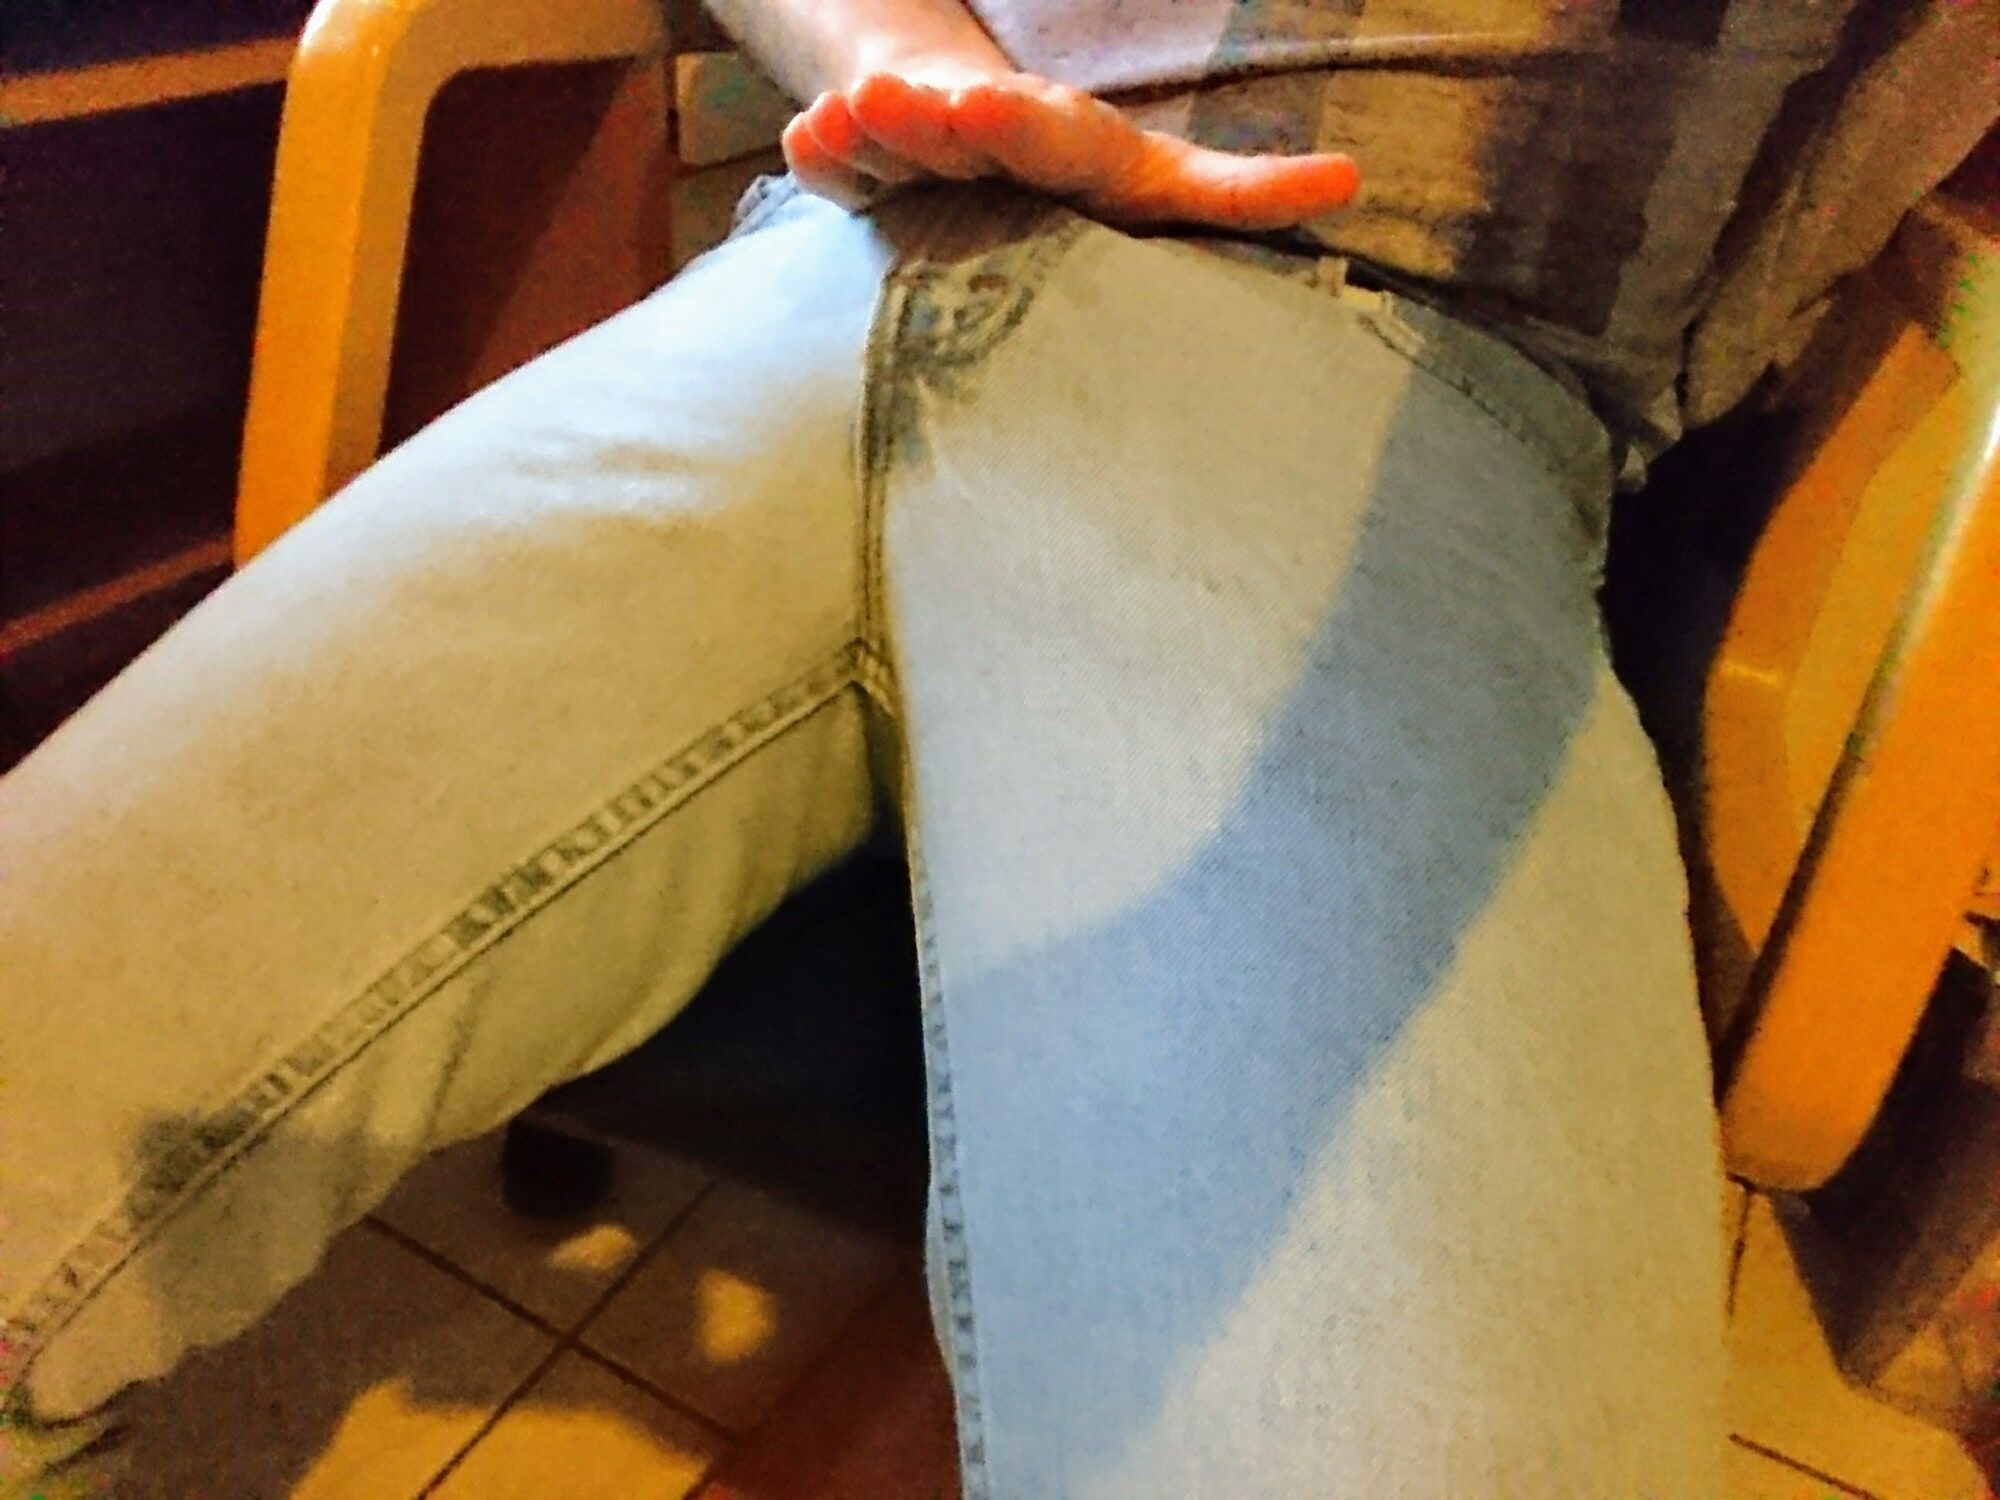 Erection in pants #21